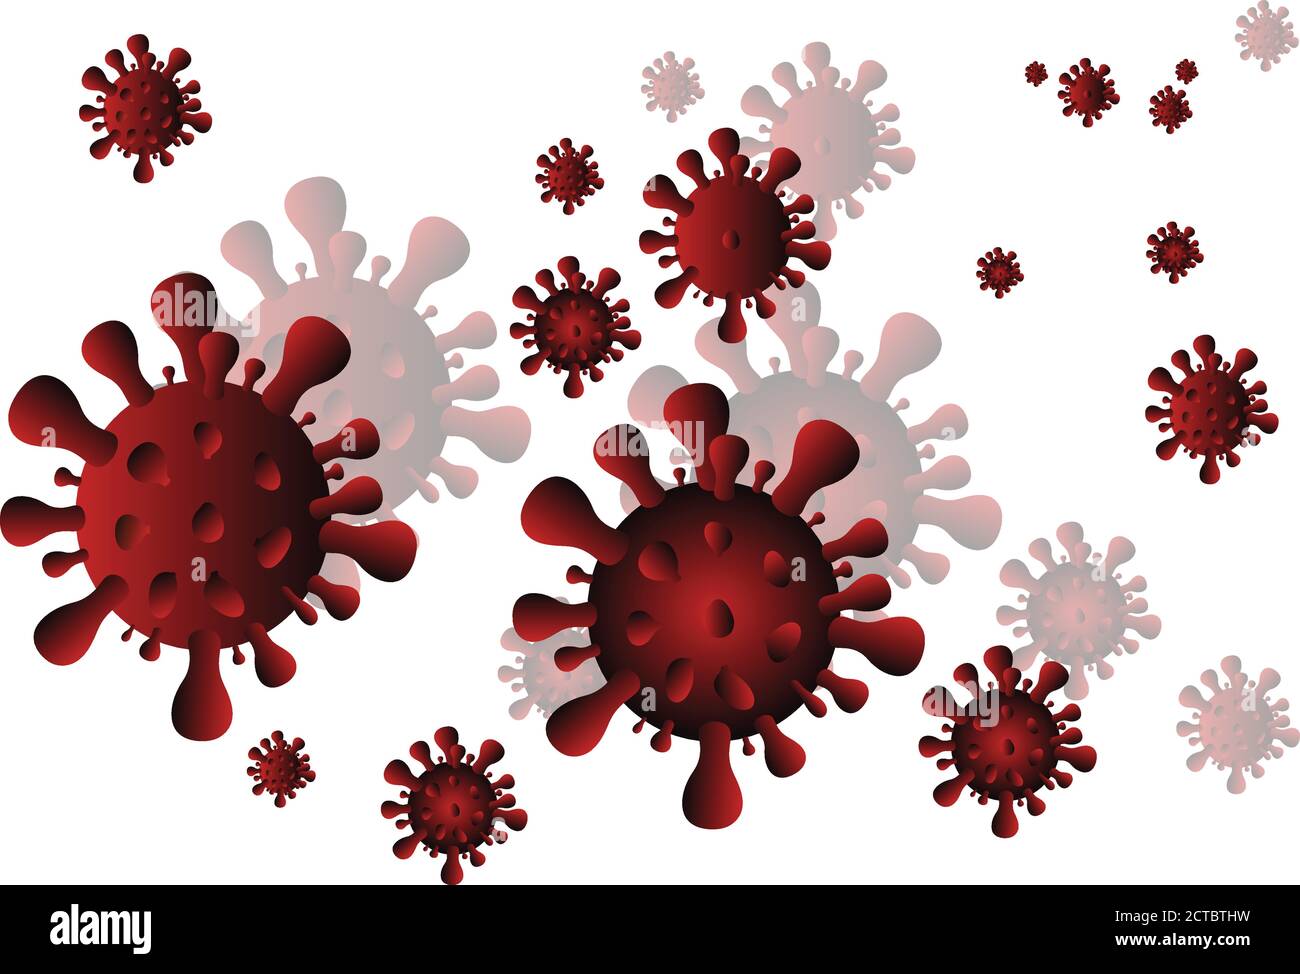 Many Different Size Red Covid 19 Virus Symbols Stock Vector